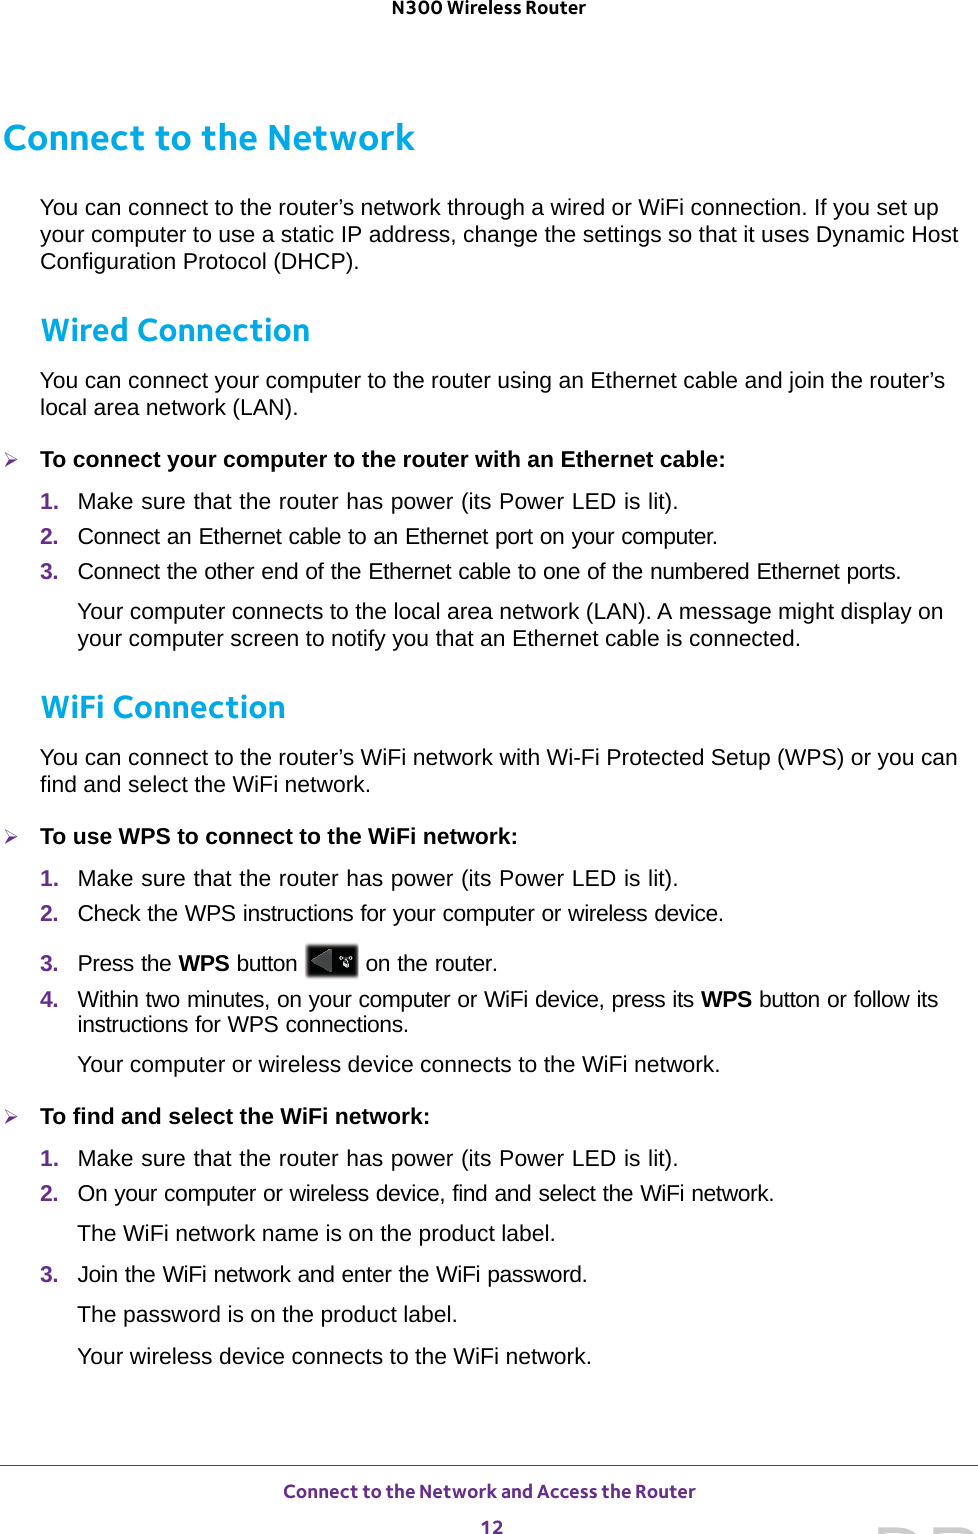 Connect to the Network and Access the Router 12N300 Wireless Router Connect to the NetworkYou can connect to the router’s network through a wired or WiFi connection. If you set up your computer to use a static IP address, change the settings so that it uses Dynamic Host Configuration Protocol (DHCP). Wired ConnectionYou can connect your computer to the router using an Ethernet cable and join the router’s local area network (LAN).To connect your computer to the router with an Ethernet cable:1.  Make sure that the router has power (its Power LED is lit).2.  Connect an Ethernet cable to an Ethernet port on your computer.3.  Connect the other end of the Ethernet cable to one of the numbered Ethernet ports.Your computer connects to the local area network (LAN). A message might display on your computer screen to notify you that an Ethernet cable is connected.WiFi ConnectionYou can connect to the router’s WiFi network with Wi-Fi Protected Setup (WPS) or you can find and select the WiFi network.To use WPS to connect to the WiFi network:1.  Make sure that the router has power (its Power LED is lit).2.  Check the WPS instructions for your computer or wireless device.3.  Press the WPS button   on the router.4.  Within two minutes, on your computer or WiFi device, press its WPS button or follow its instructions for WPS connections.Your computer or wireless device connects to the WiFi network.To find and select the WiFi network:1.  Make sure that the router has power (its Power LED is lit).2.  On your computer or wireless device, find and select the WiFi network.The WiFi network name is on the product label. 3.  Join the WiFi network and enter the WiFi password.The password is on the product label.Your wireless device connects to the WiFi network.DRAFT